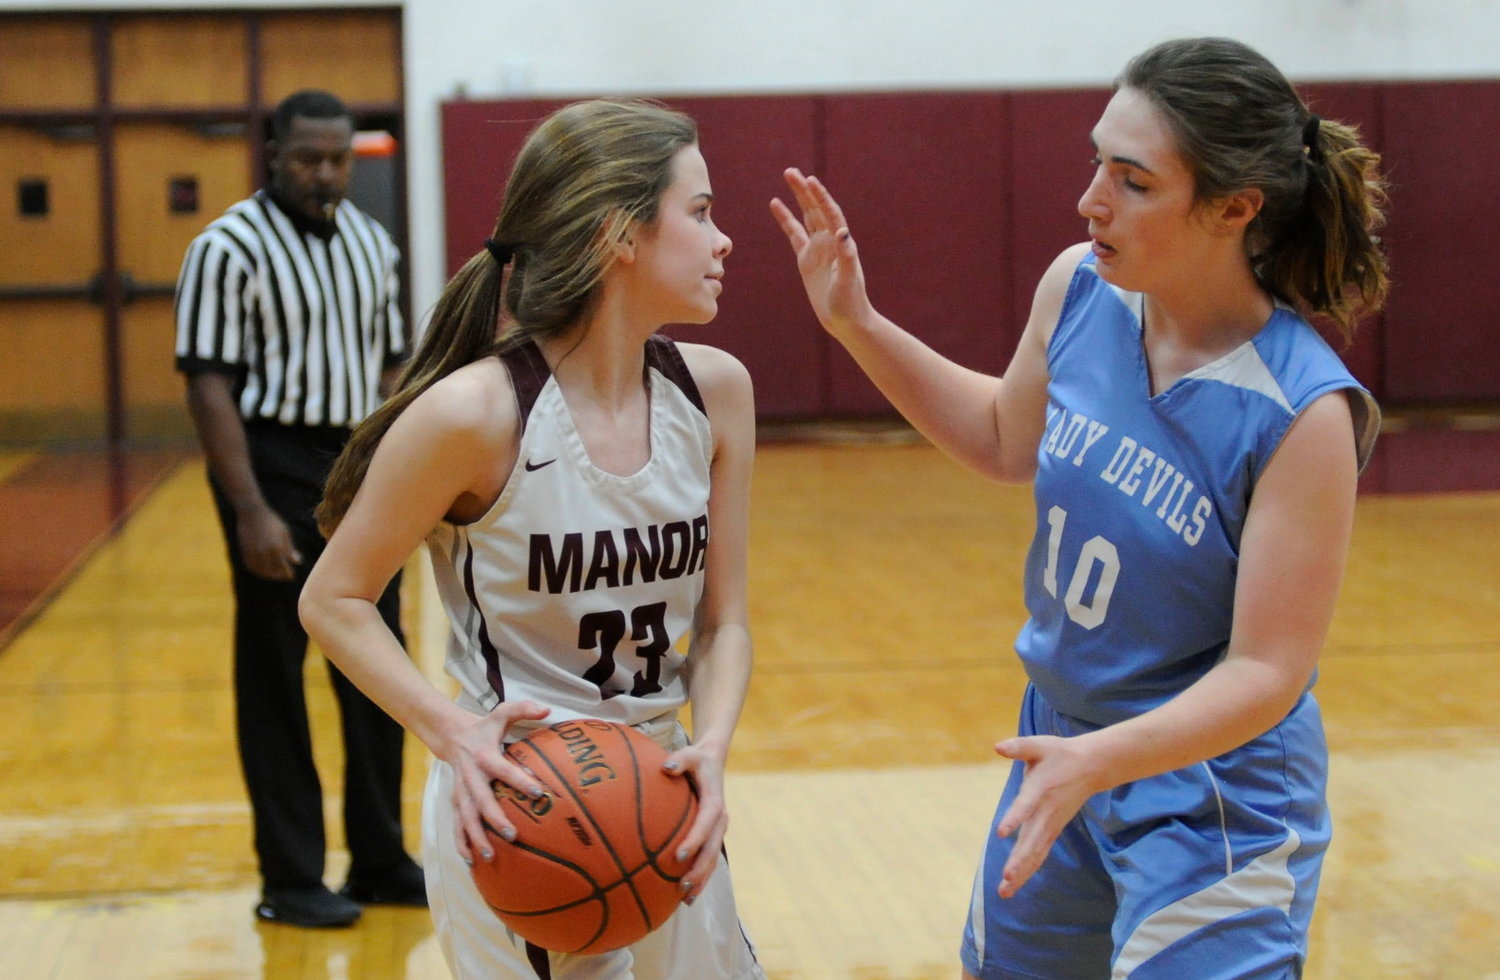 Face off! Manor’s Mya Ross, an eighth-grade guard, and Roscoe’s Alexis O’Shaughnessy, a senior center.